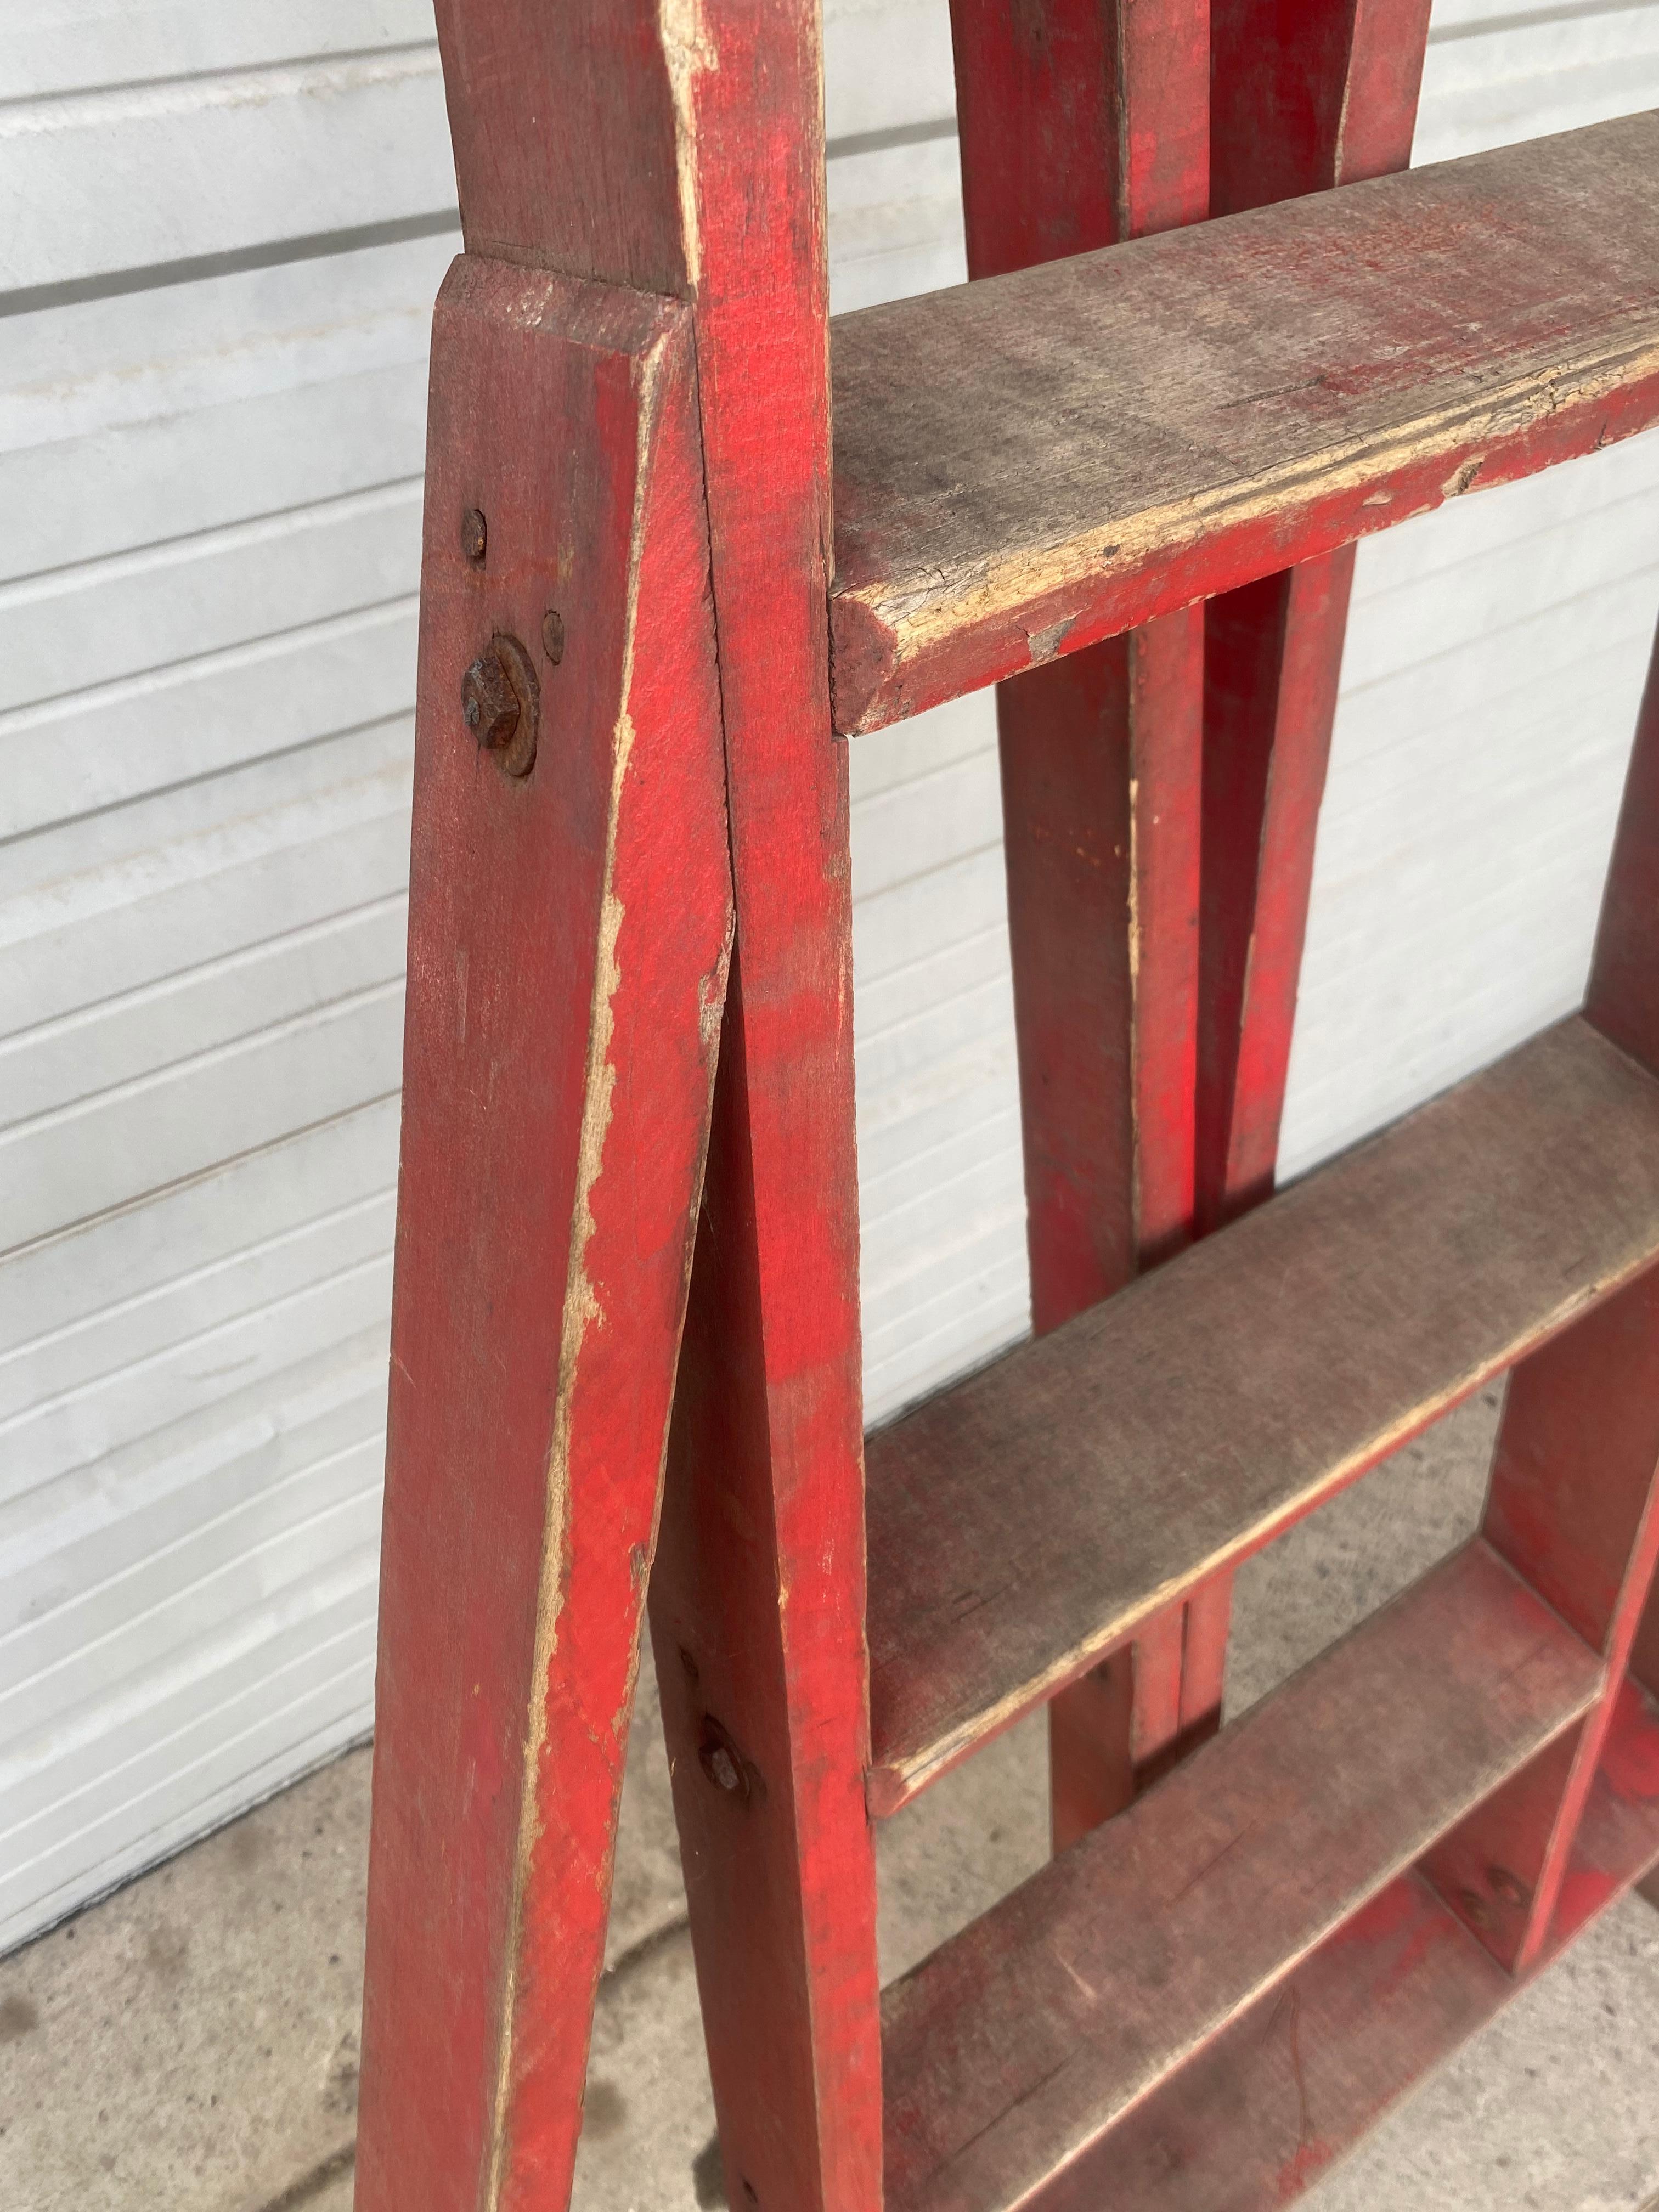 Early antique tri-pod orchard (fruit picking) step ladder. Great red color, retains original finish, surface, patina. Classic design,Hand delivery avail to New York City or anywhere en route from Buffalo NY.